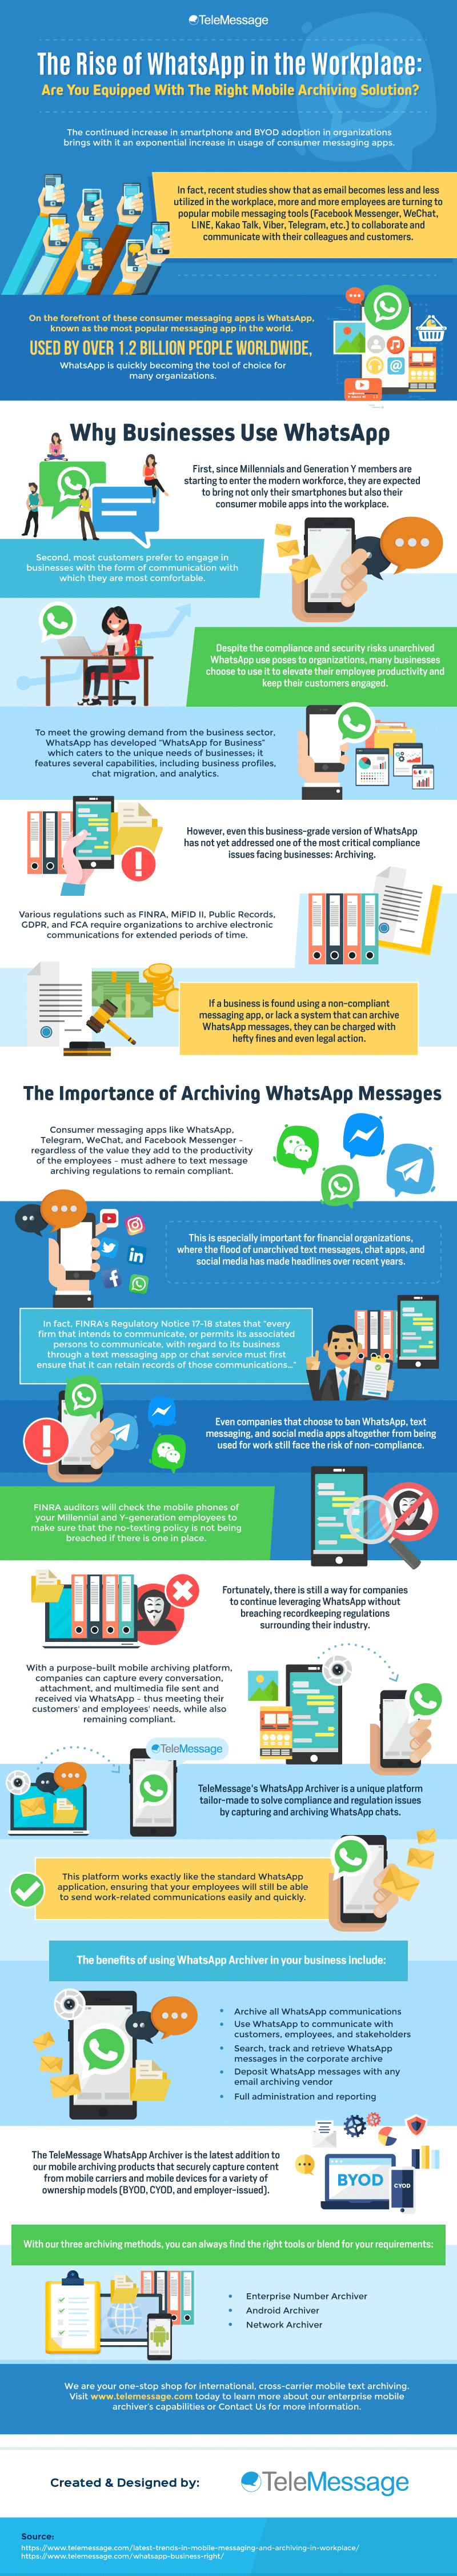 The Rise of WhatsApp in Workplace Are You Equipped With The Right Mobile Archiving Solution